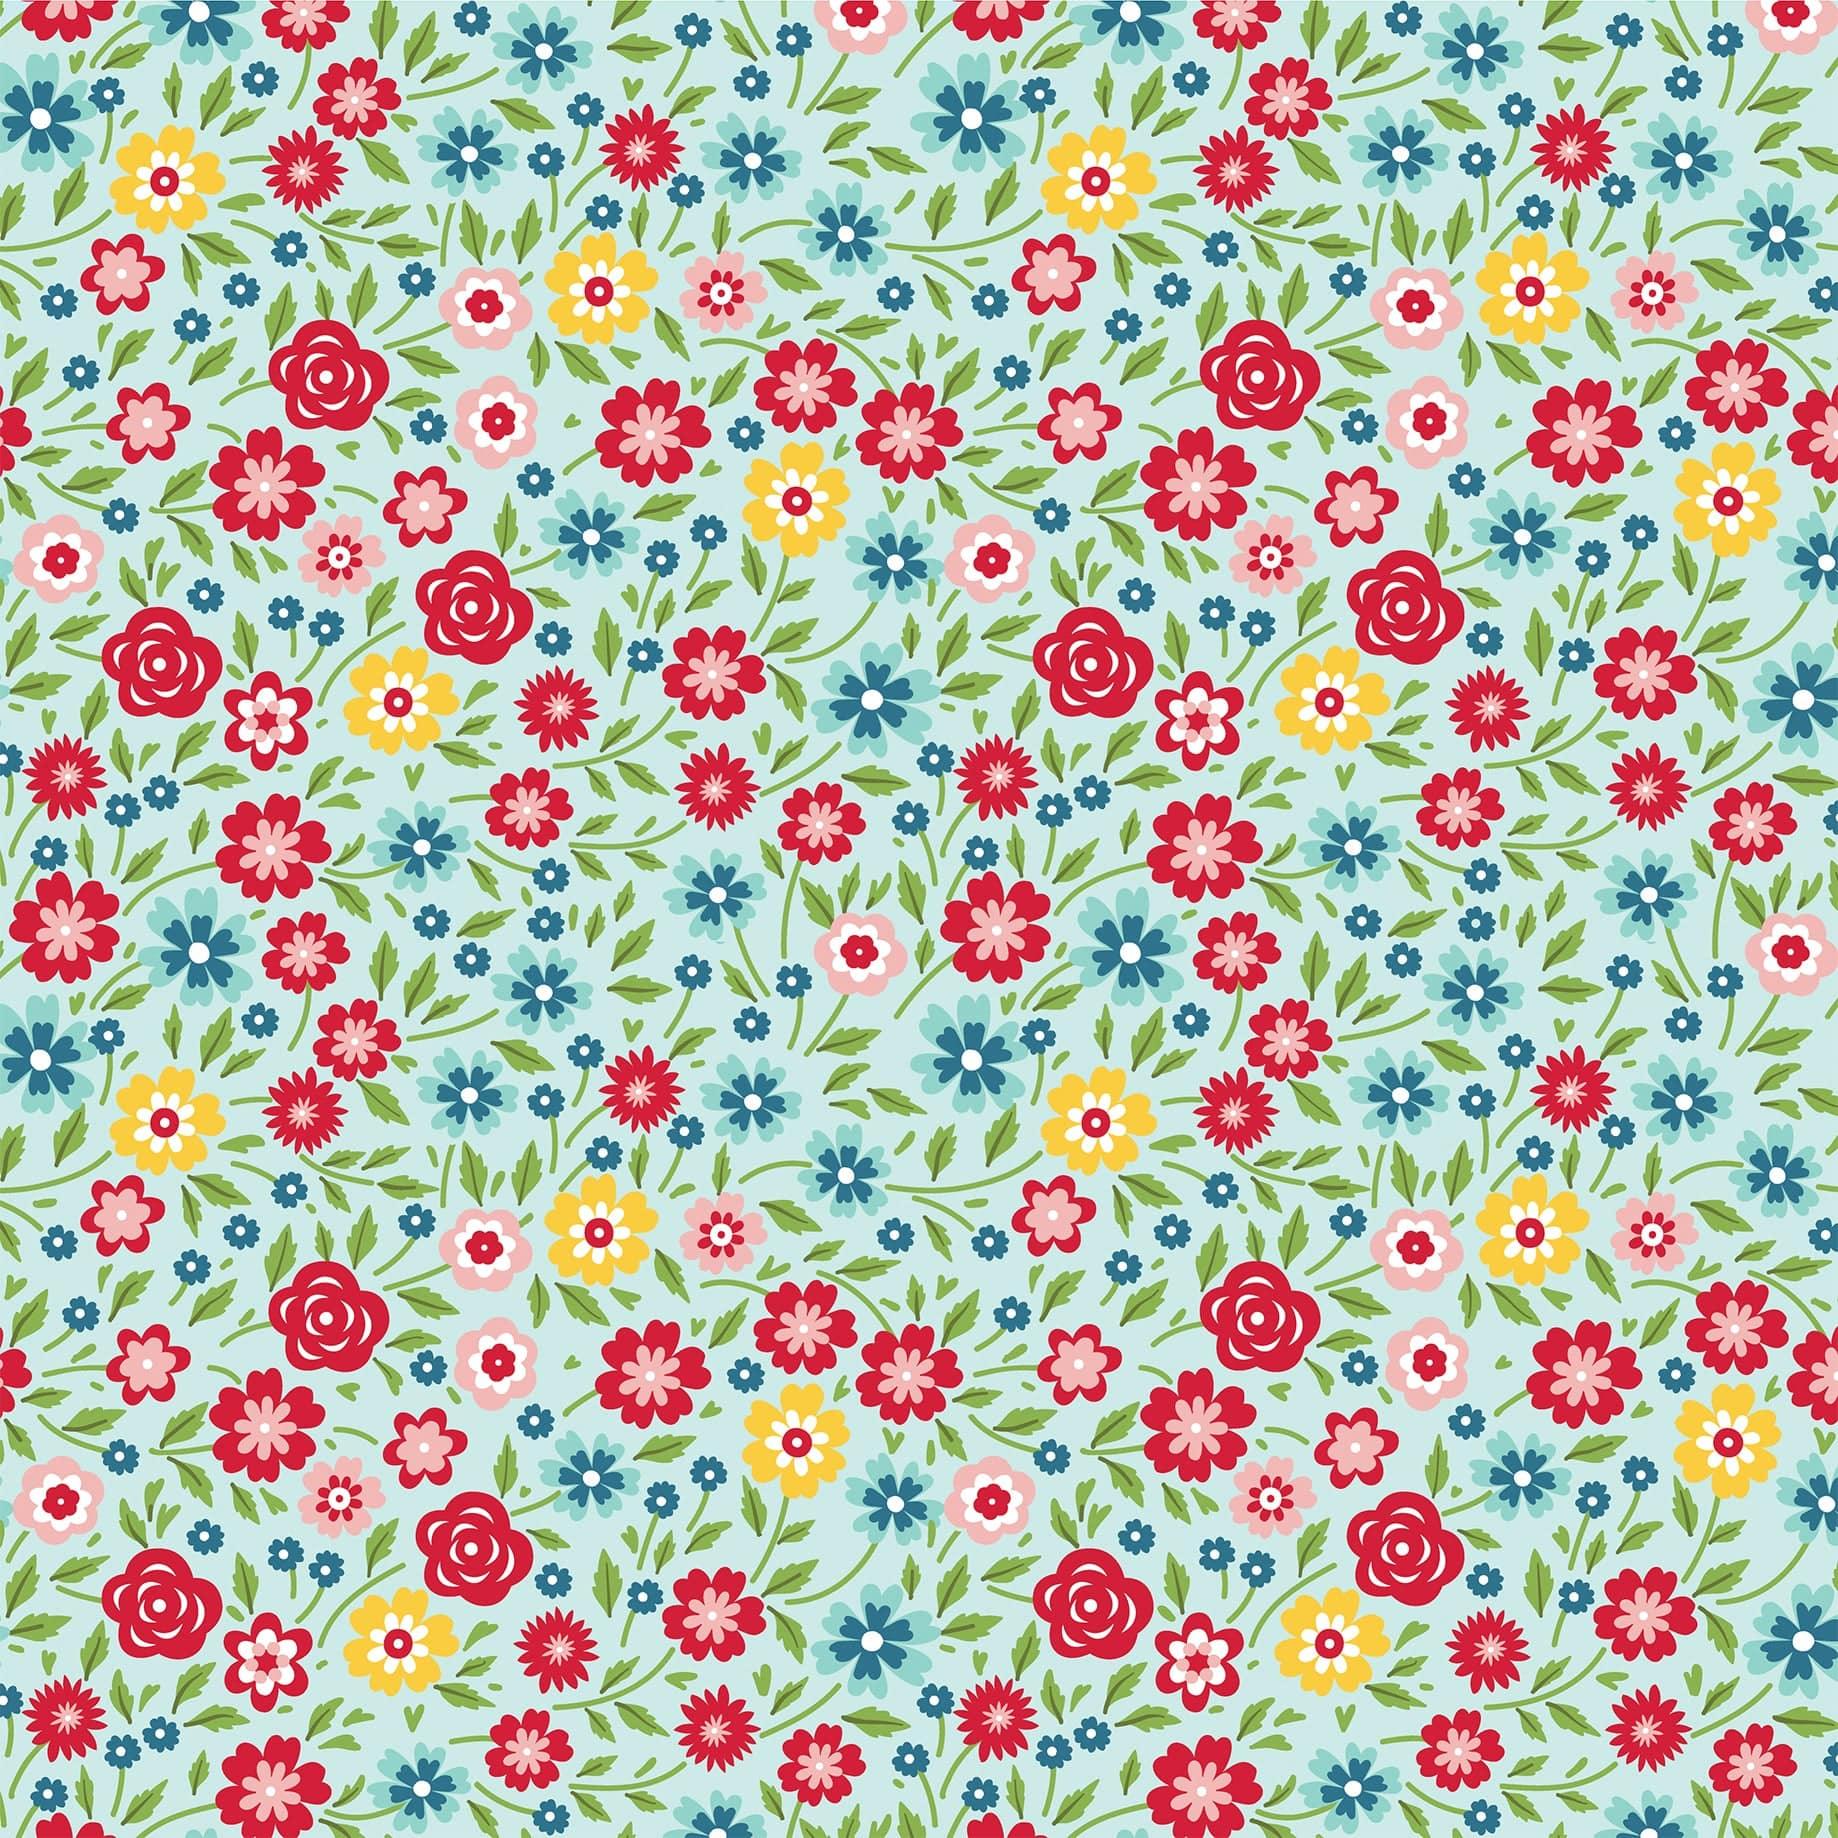 Slice of Summer Collection Hello Summer Floral 12 x 12 Double-Sided Scrapbook Paper by Echo Park Paper - Scrapbook Supply Companies